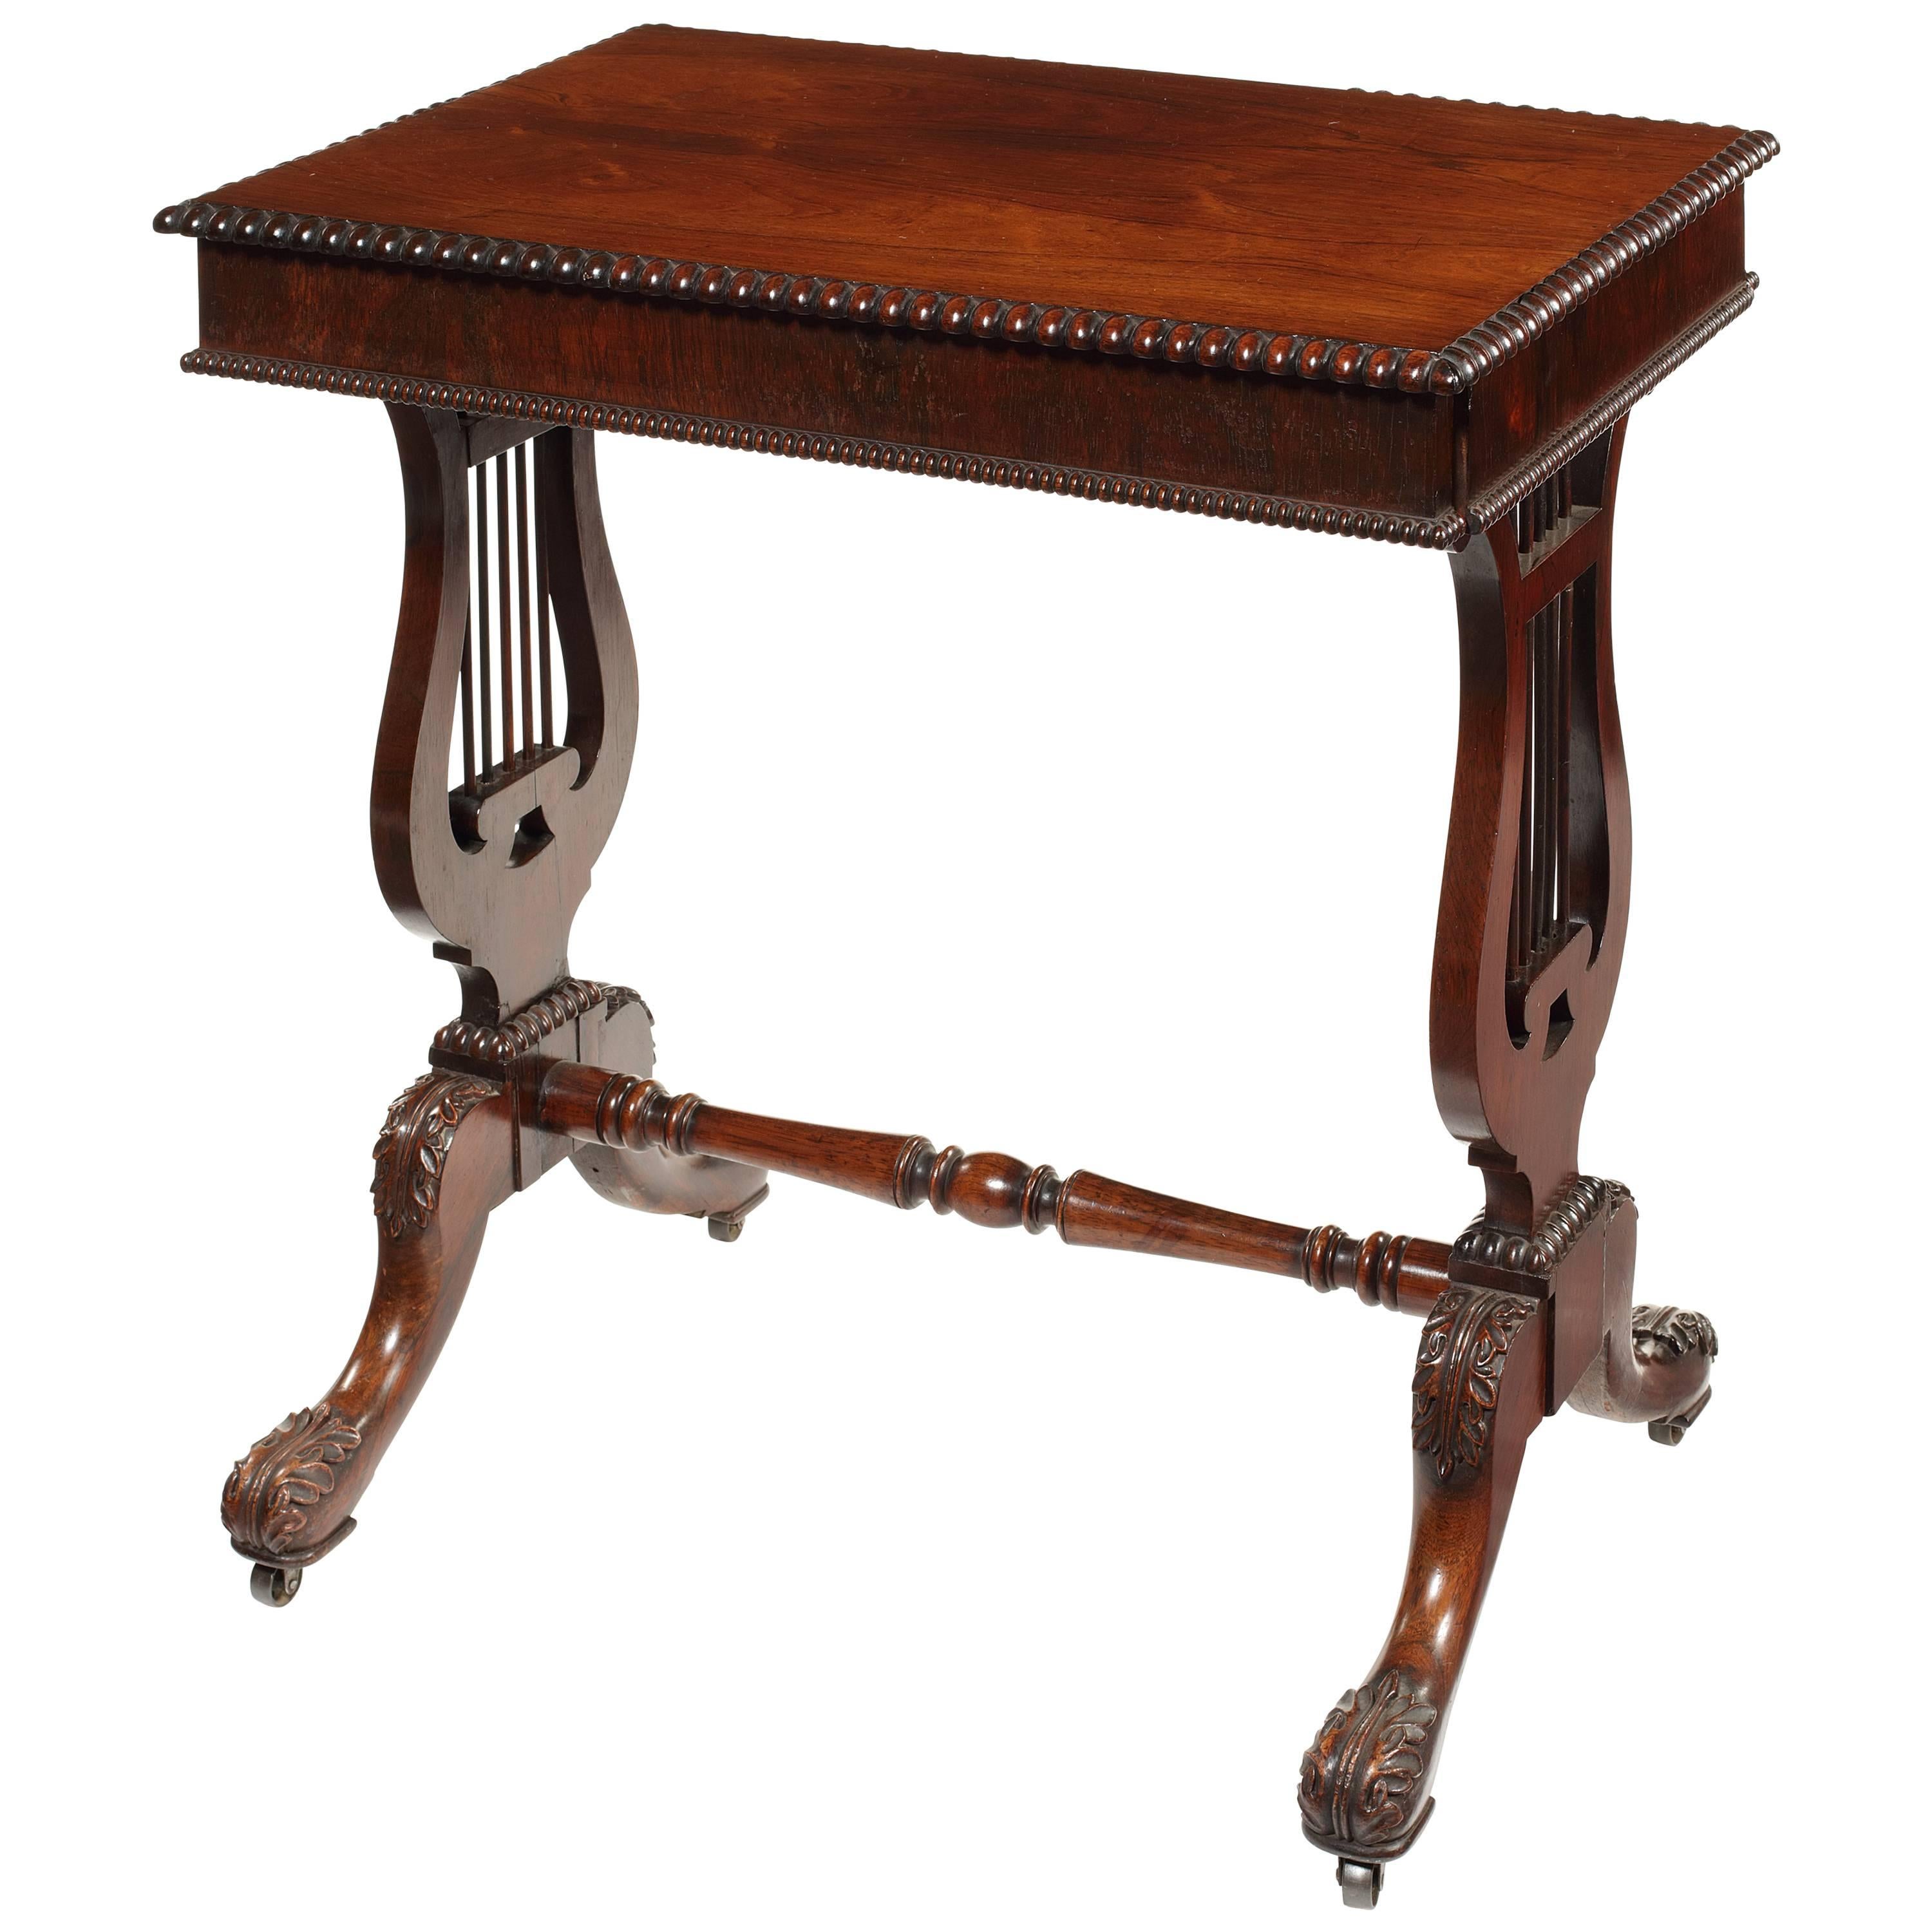 William IV Rosewood Lyre End Work Table Attributed to Gillows